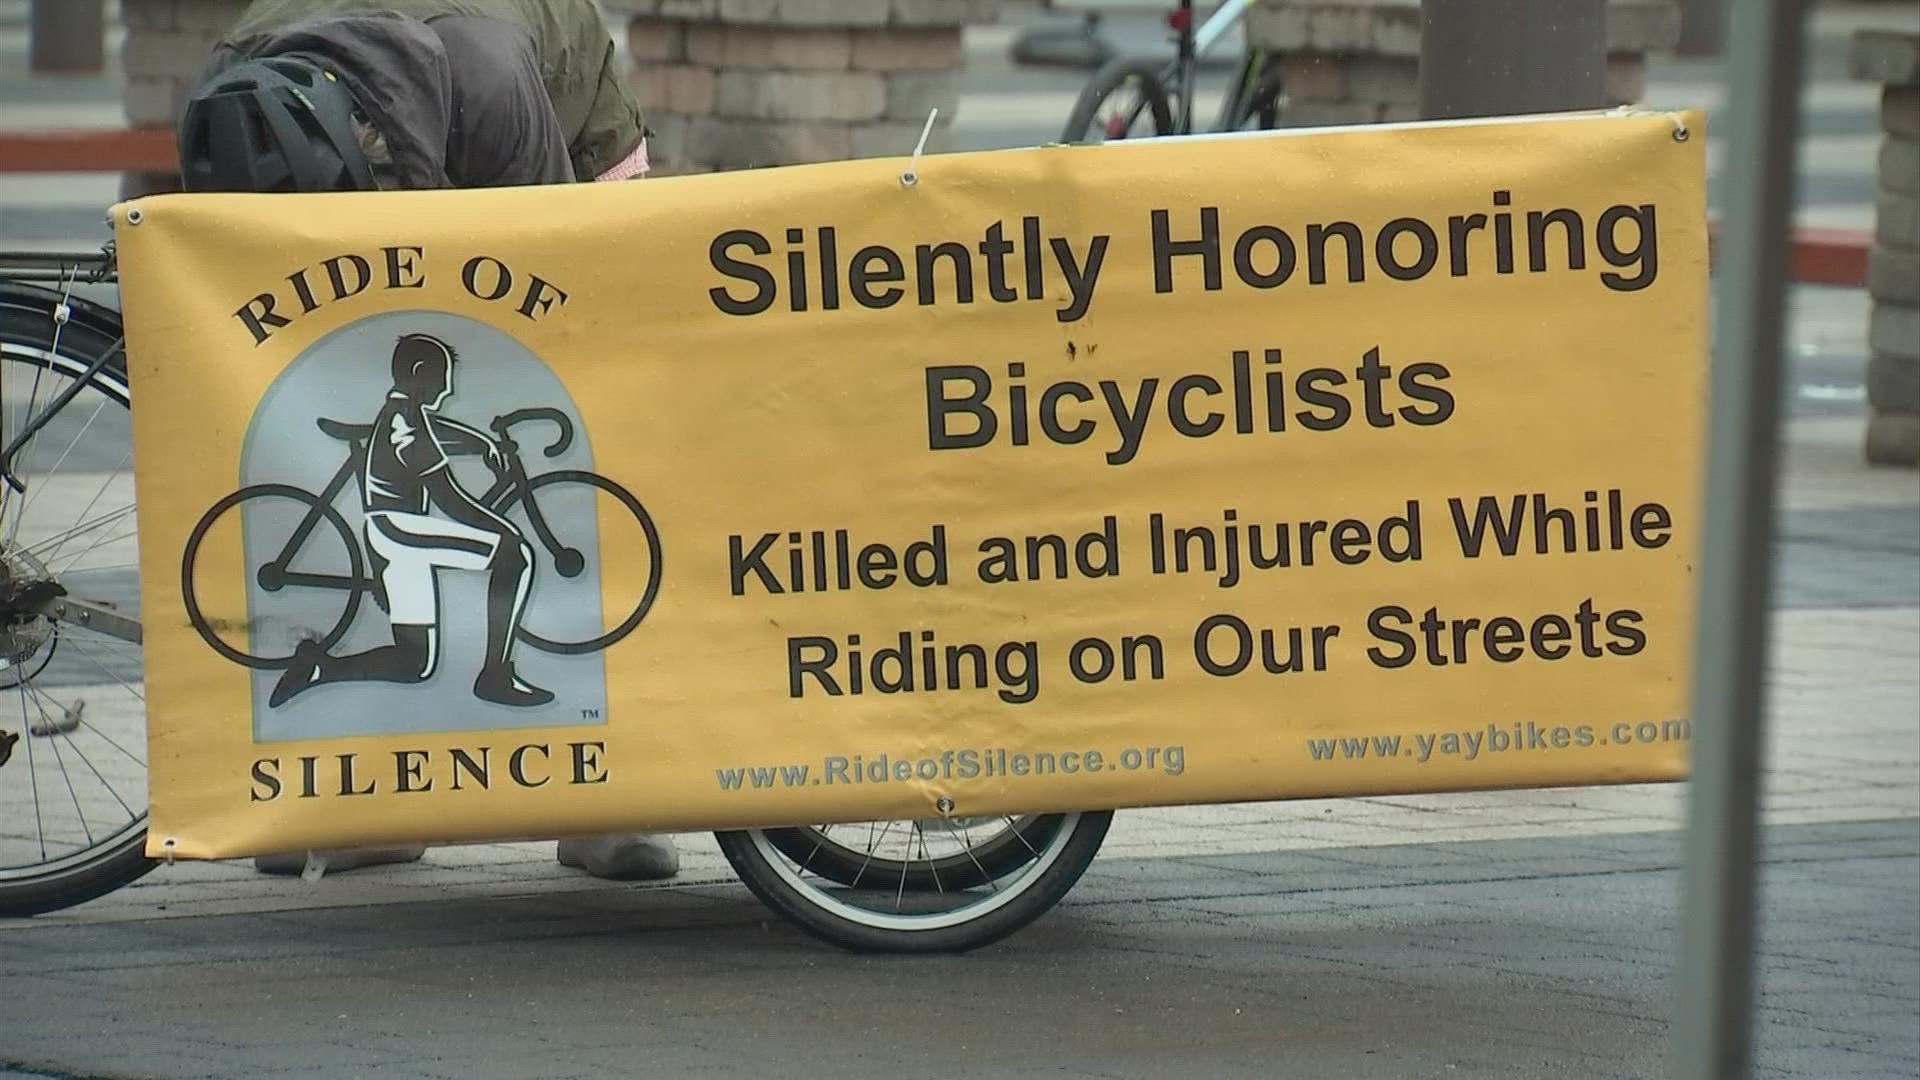 Riders gathered at Genoa Park along Washington Boulevard around 5:30 p.m. for the event.